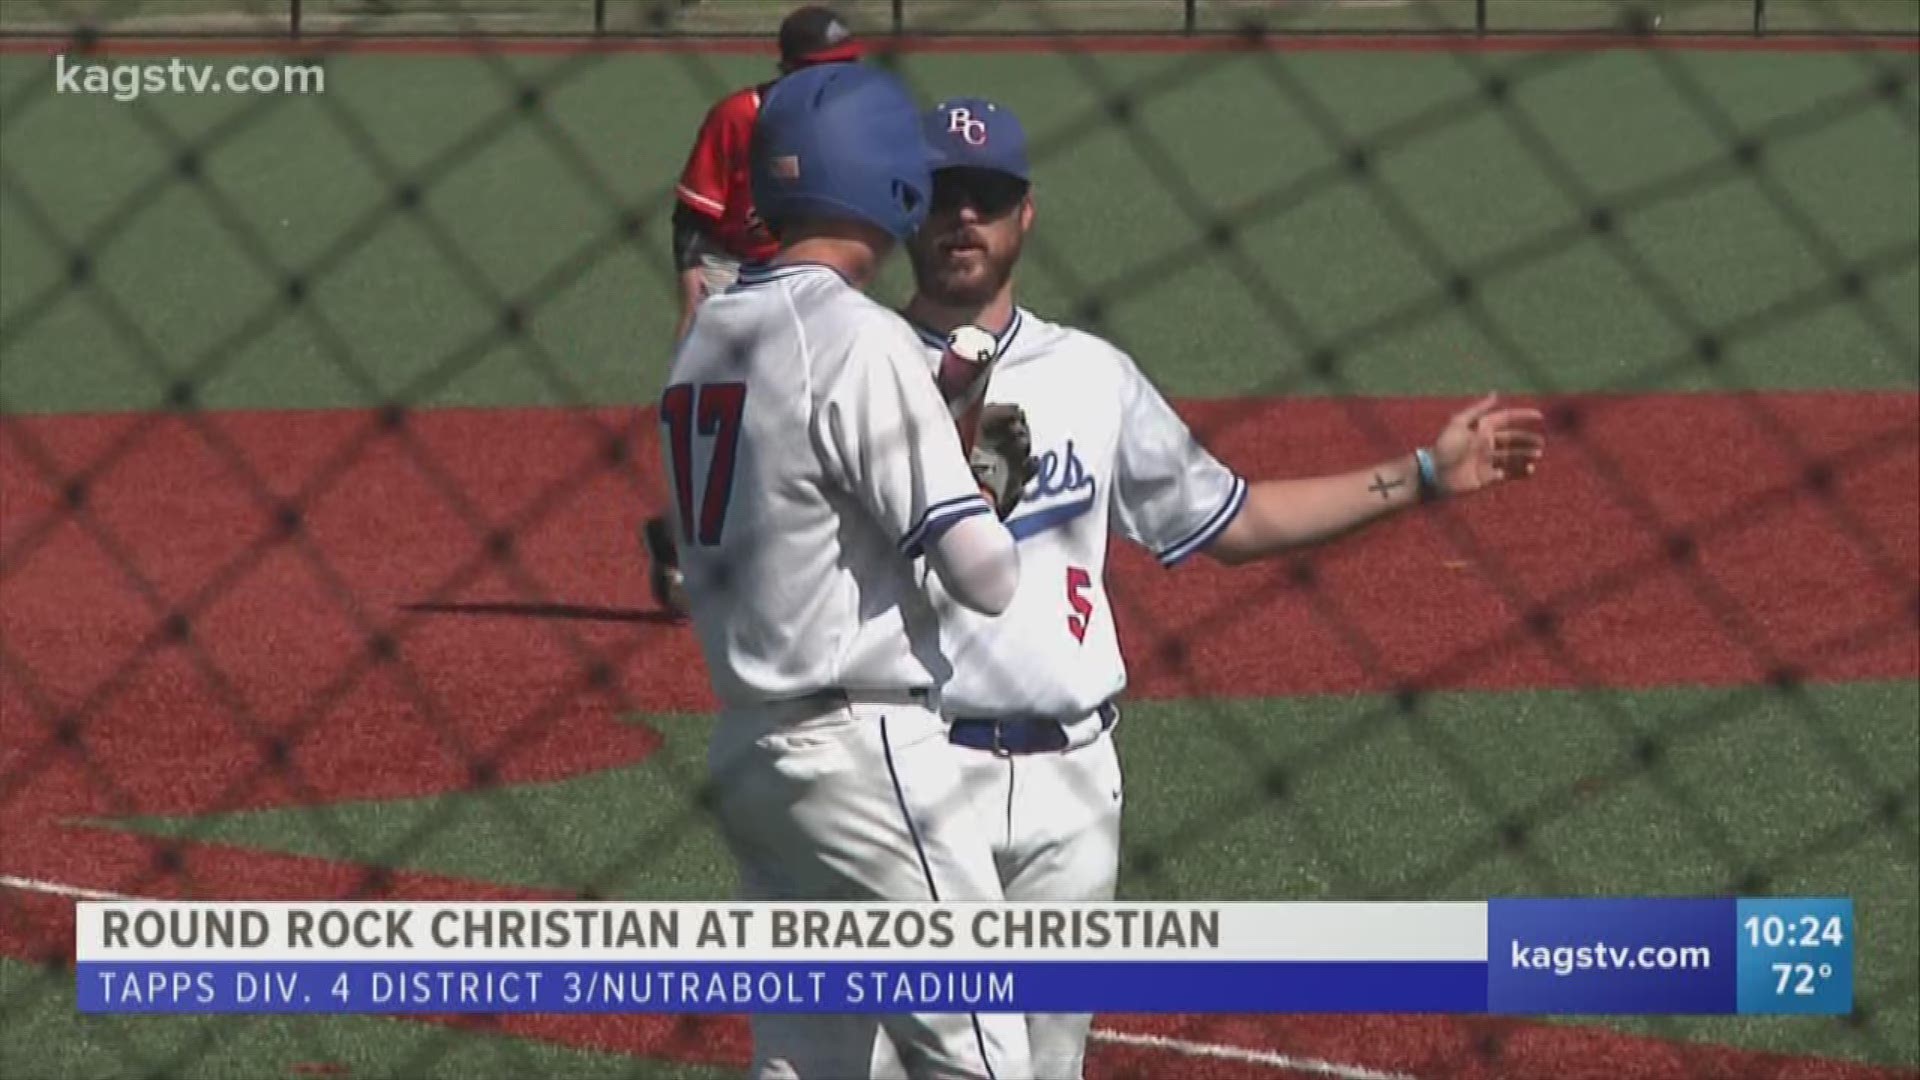 Brazos Christian swept a doubleheader with Round Rock Christian 17-1 and 10-0.